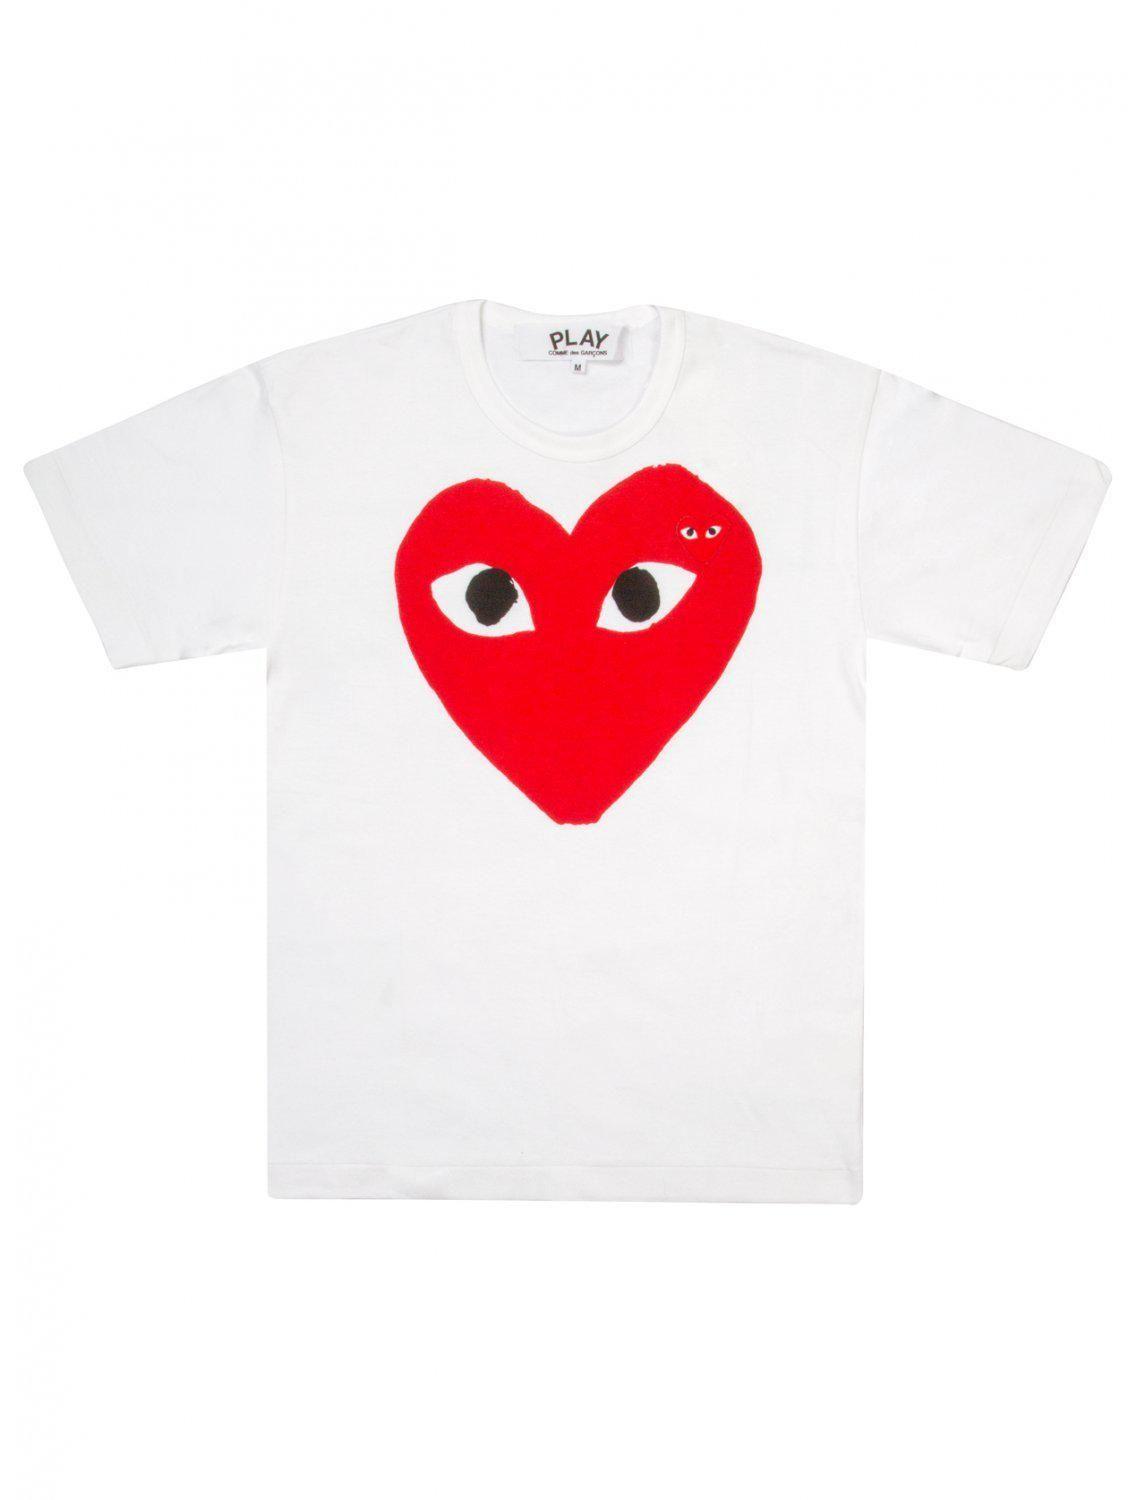 Red Heart Logo - Play Comme Des Garçons Play Red Heart Logo T-shirt in White - Lyst